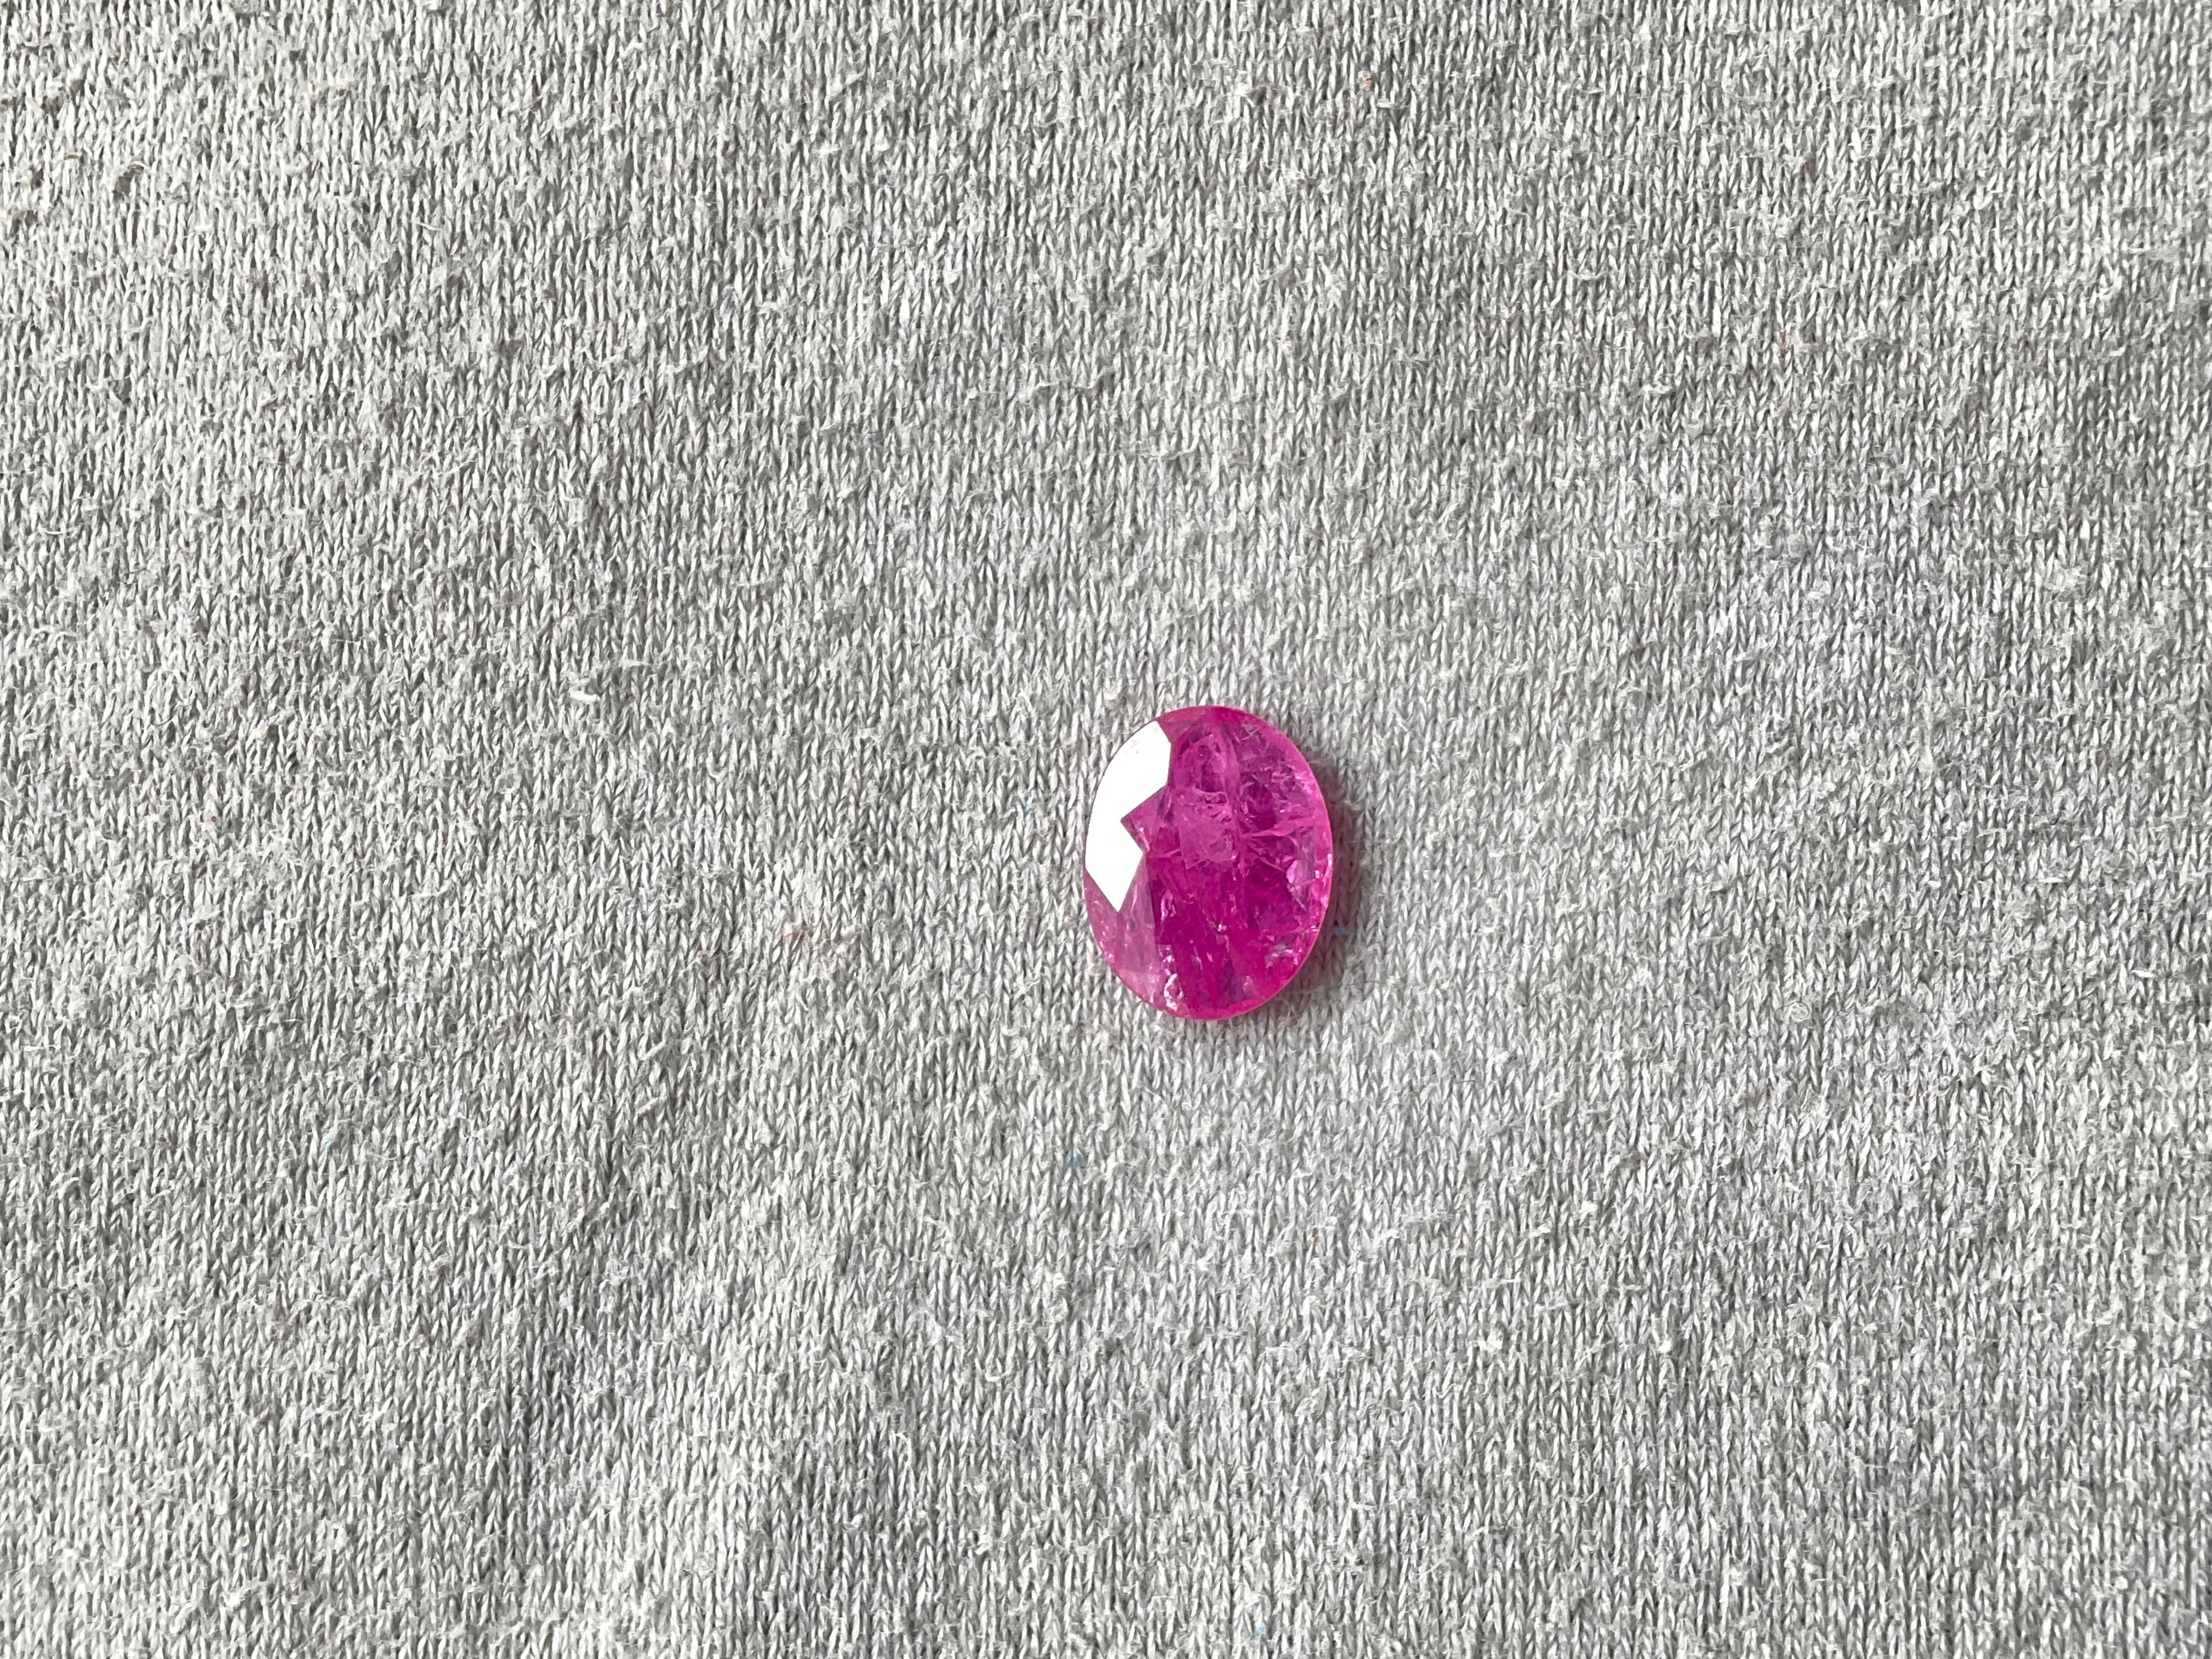 Certified 2.94 Carats Mozambique Ruby Oval Faceted Cut stone No Heat Natural Gem

Gemstone - Ruby
Weight: 2.94 Carats
Size: 11.42x9.06x2.40 MM
Pieces: 1
Shape: Faceted Oval cut stone